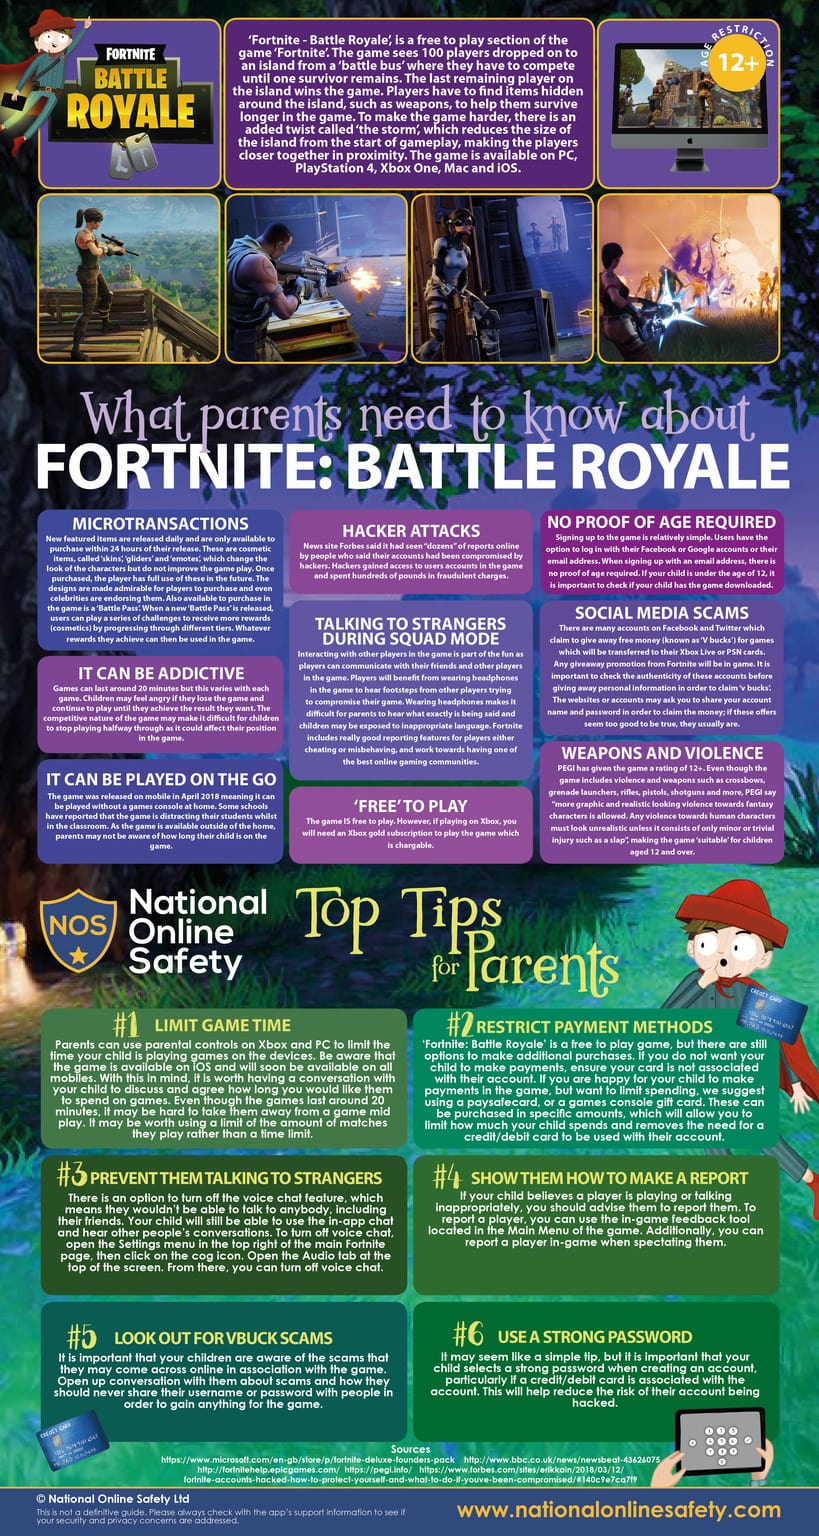 What Schools Need To Know About Fortnite Battle Royale Besa - 6 top tips for parents